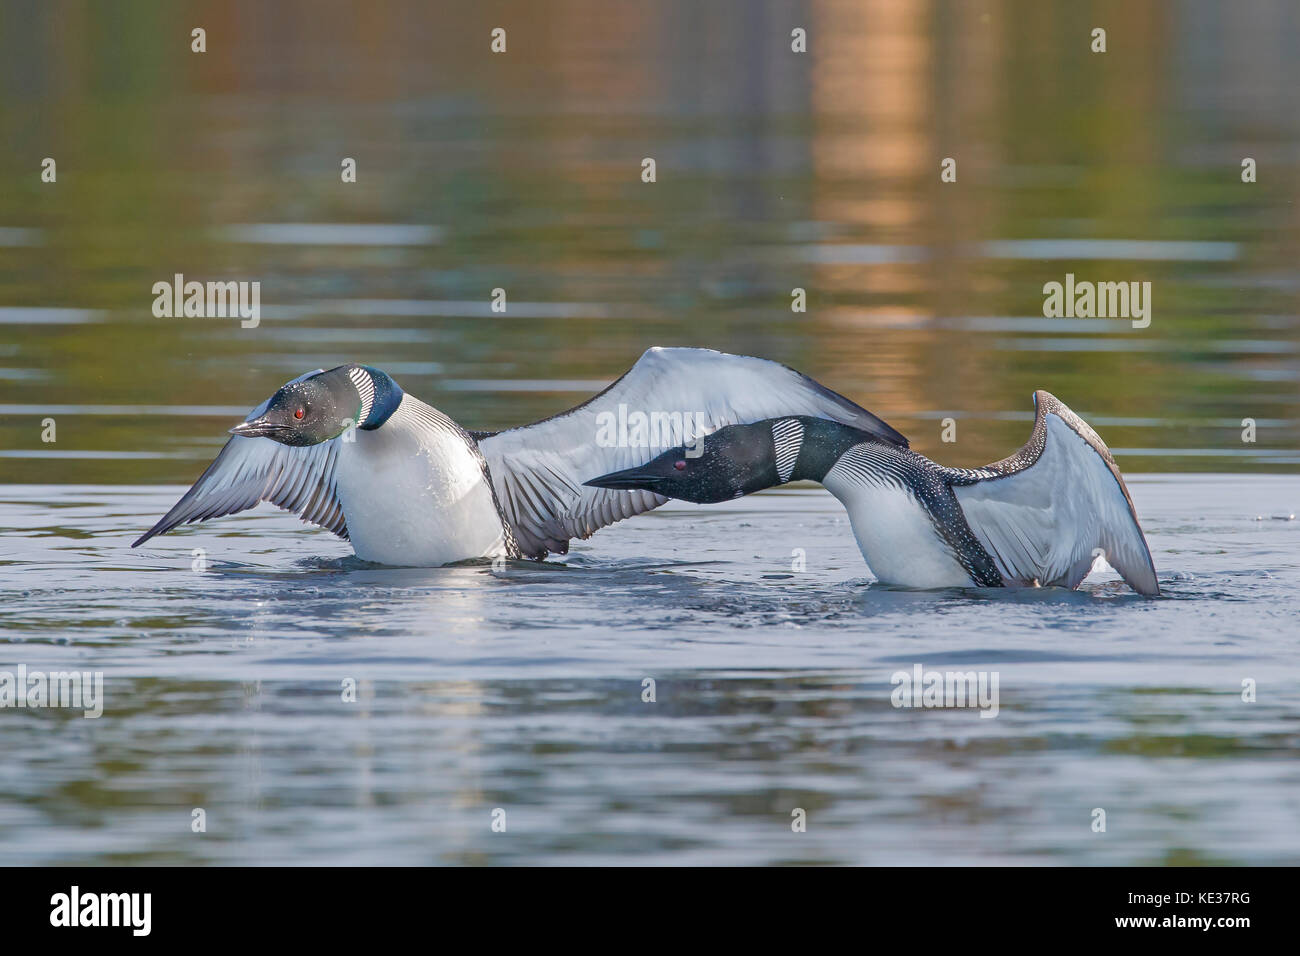 Adult common loons(Gavia immer) in an aggressive encounter, central Alberta, Canada Stock Photo